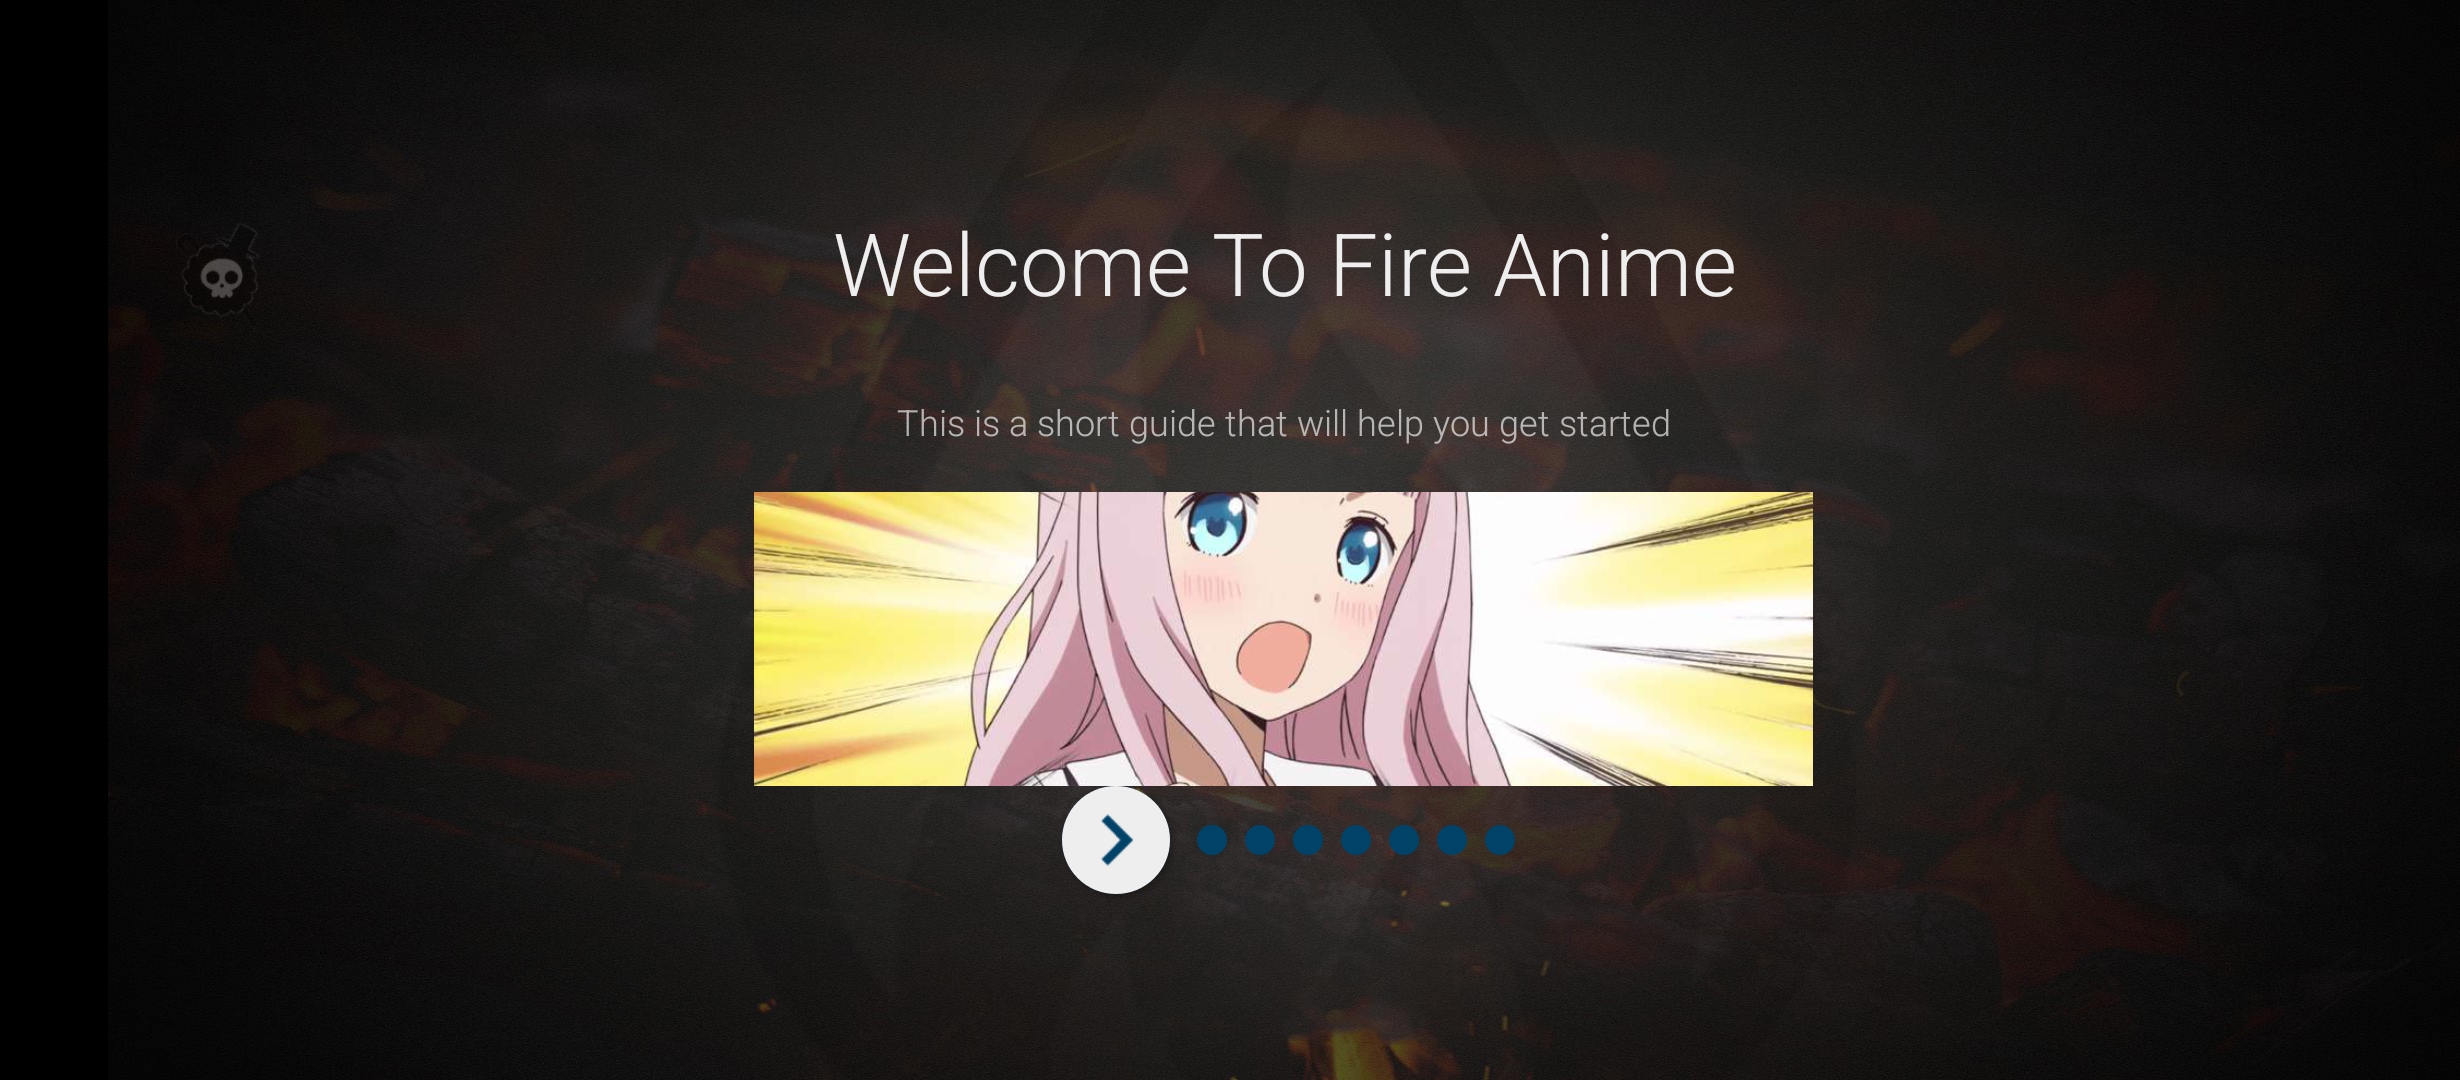 FireAnime Starting page